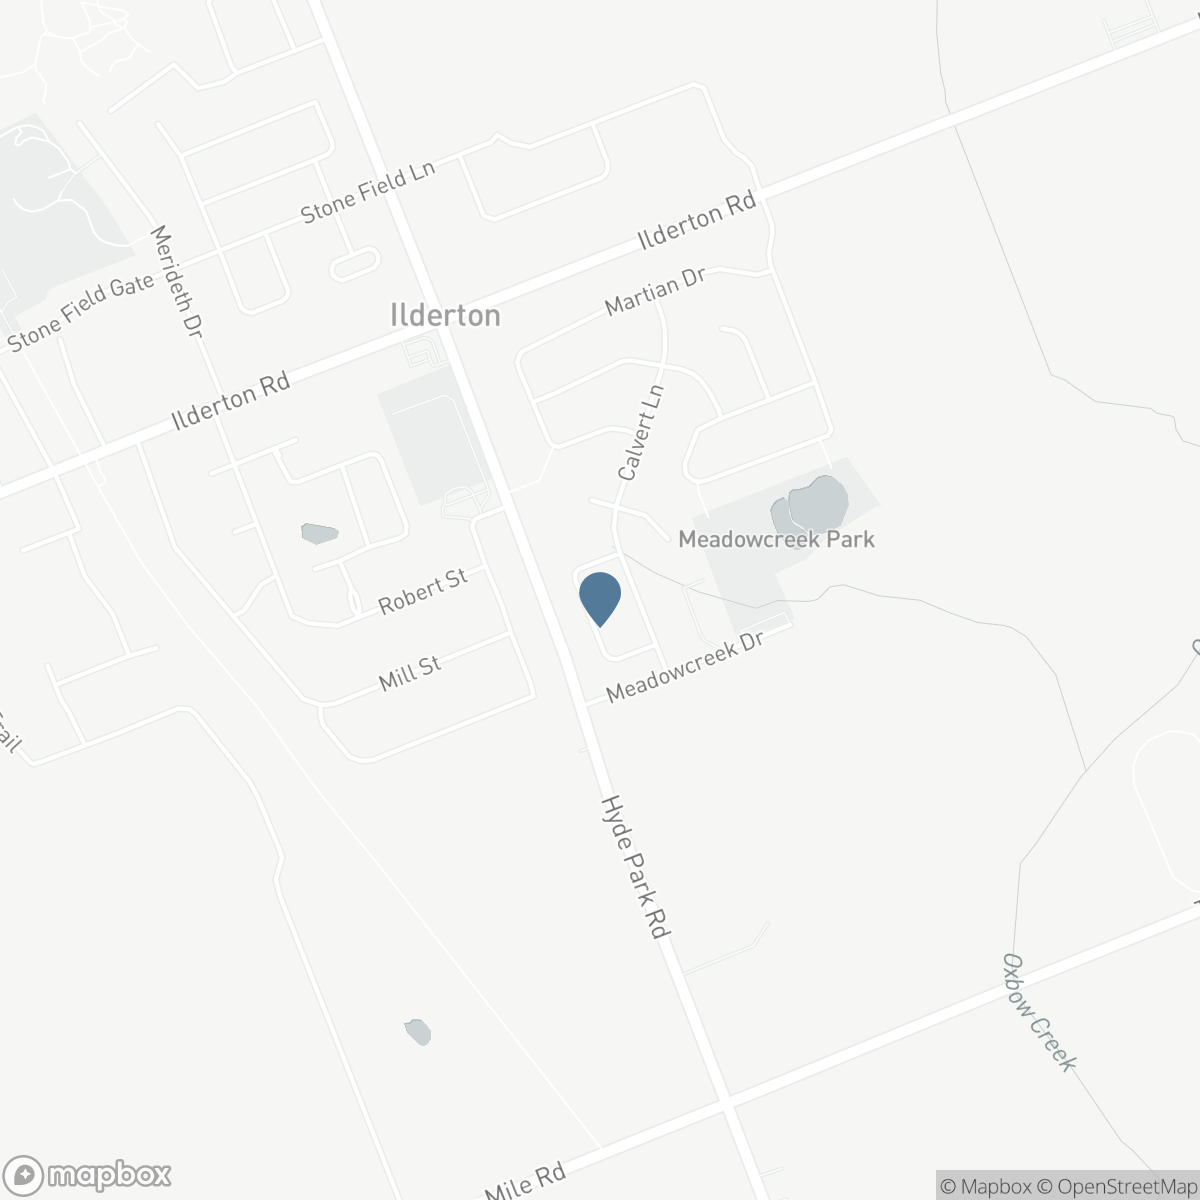 42 STONE RIDGE CRES, Middlesex Centre, Ontario N0M 2A0